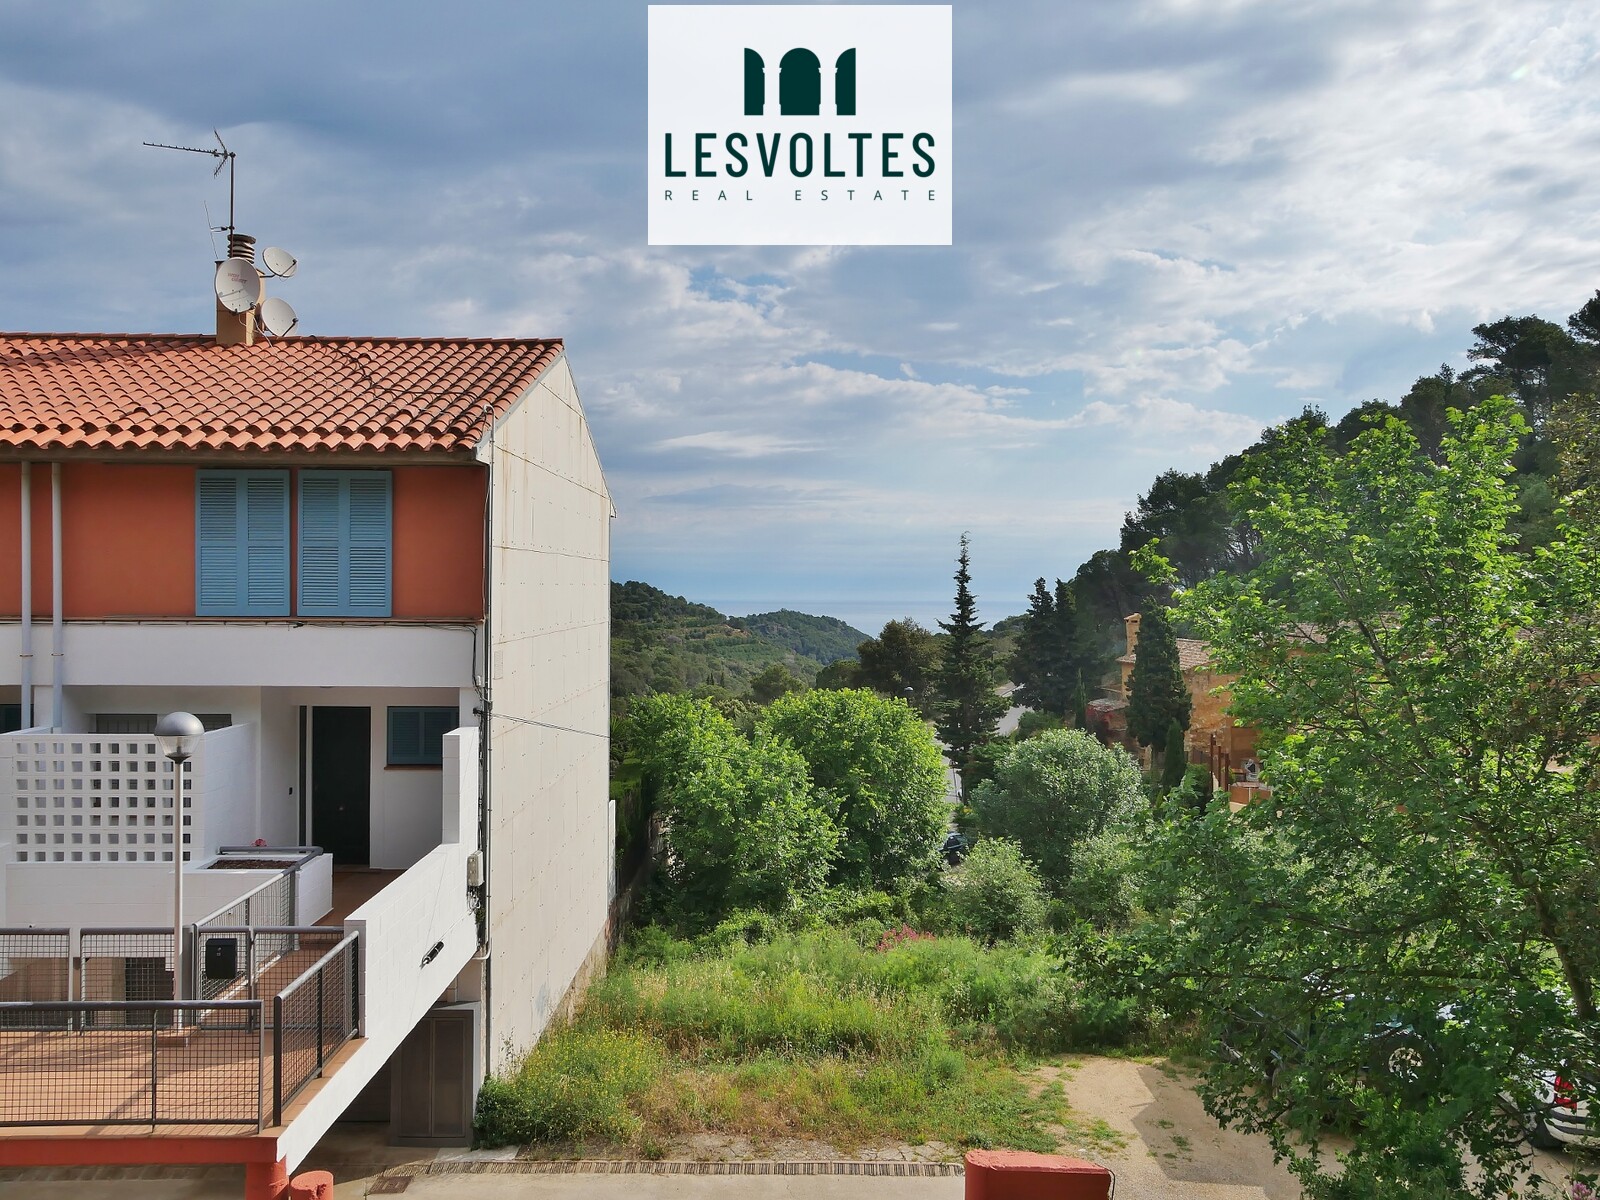 SET OF 5 PLOTS FOR SINGLE-FAMILY HOUSES FOR SALE IN THE CENTRE OF BEGUR.